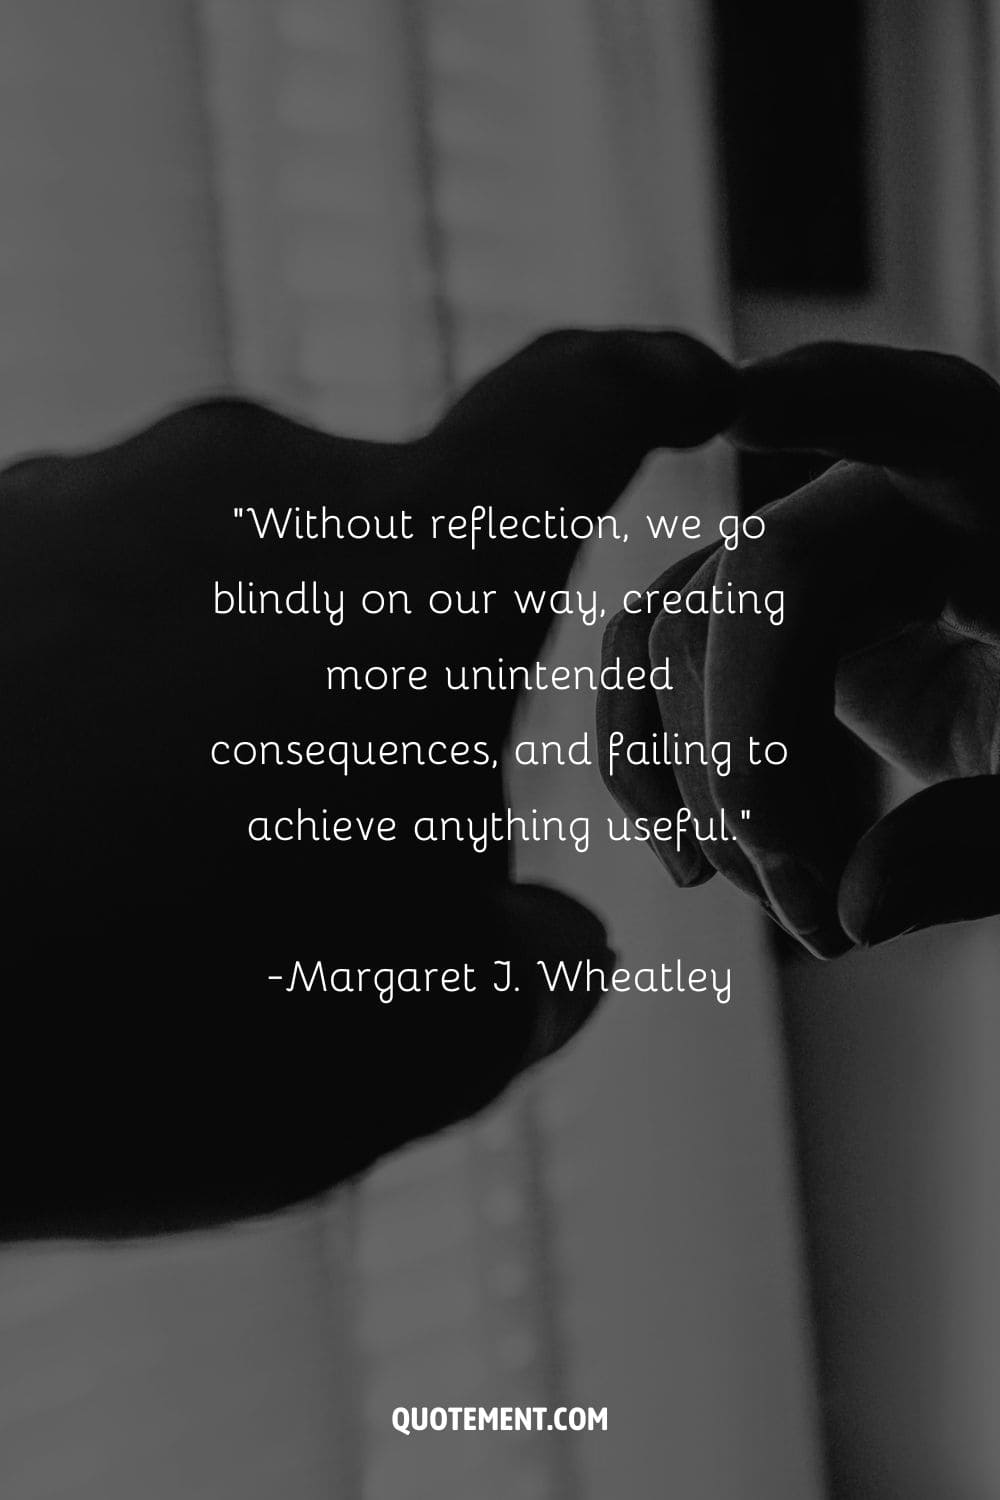 Without reflection, we go blindly on our way, creating more unintended consequences, and failing to achieve anything useful. – Margaret J. Wheatley